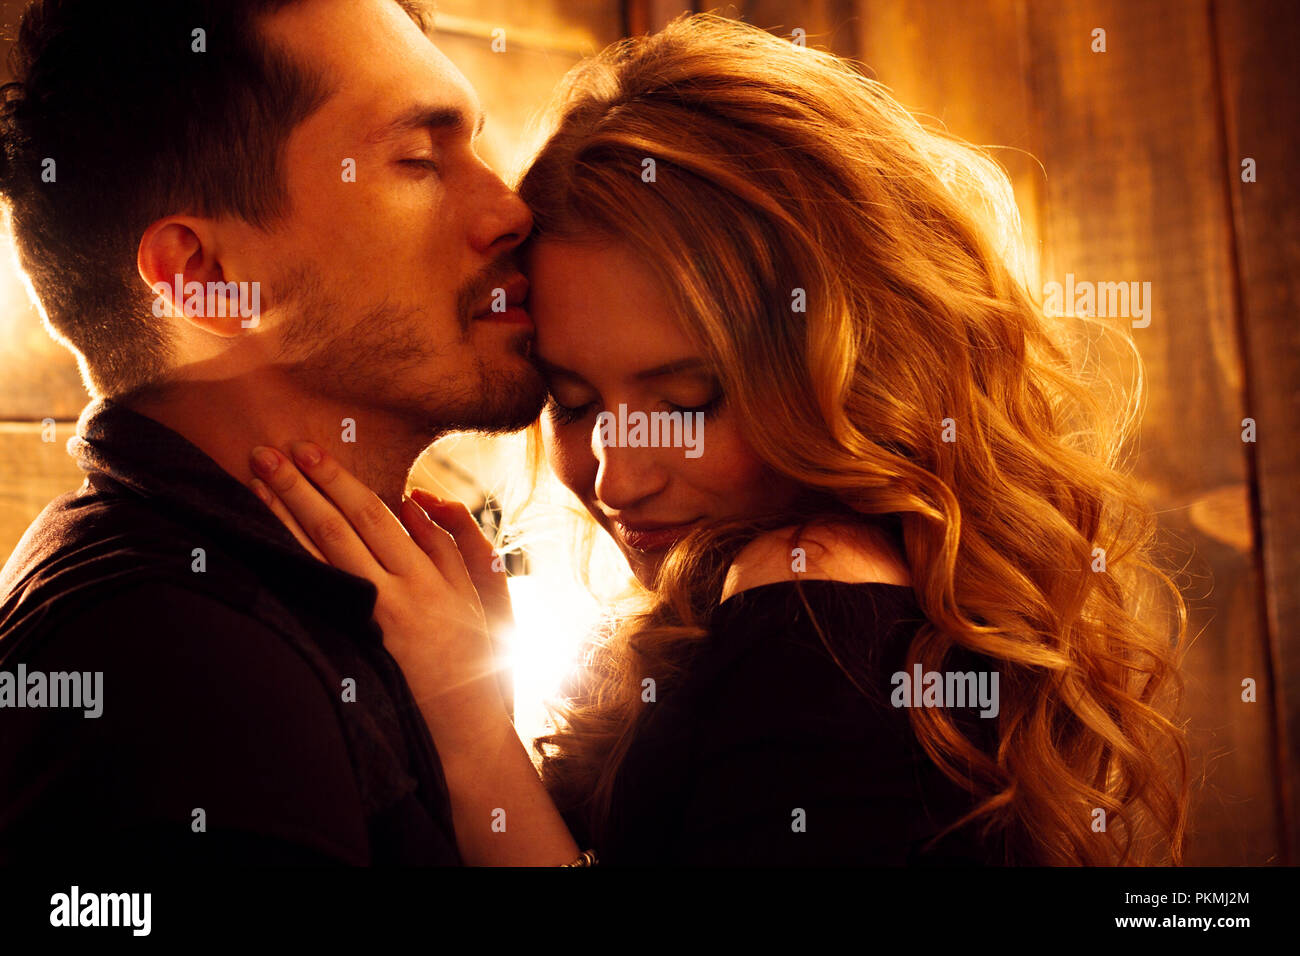 Beautiful couple in love hugging against the background of glowing lights.  Studio portrait photo of a girl blondes and a guy with short hair. Valentin  Stock Photo - Alamy